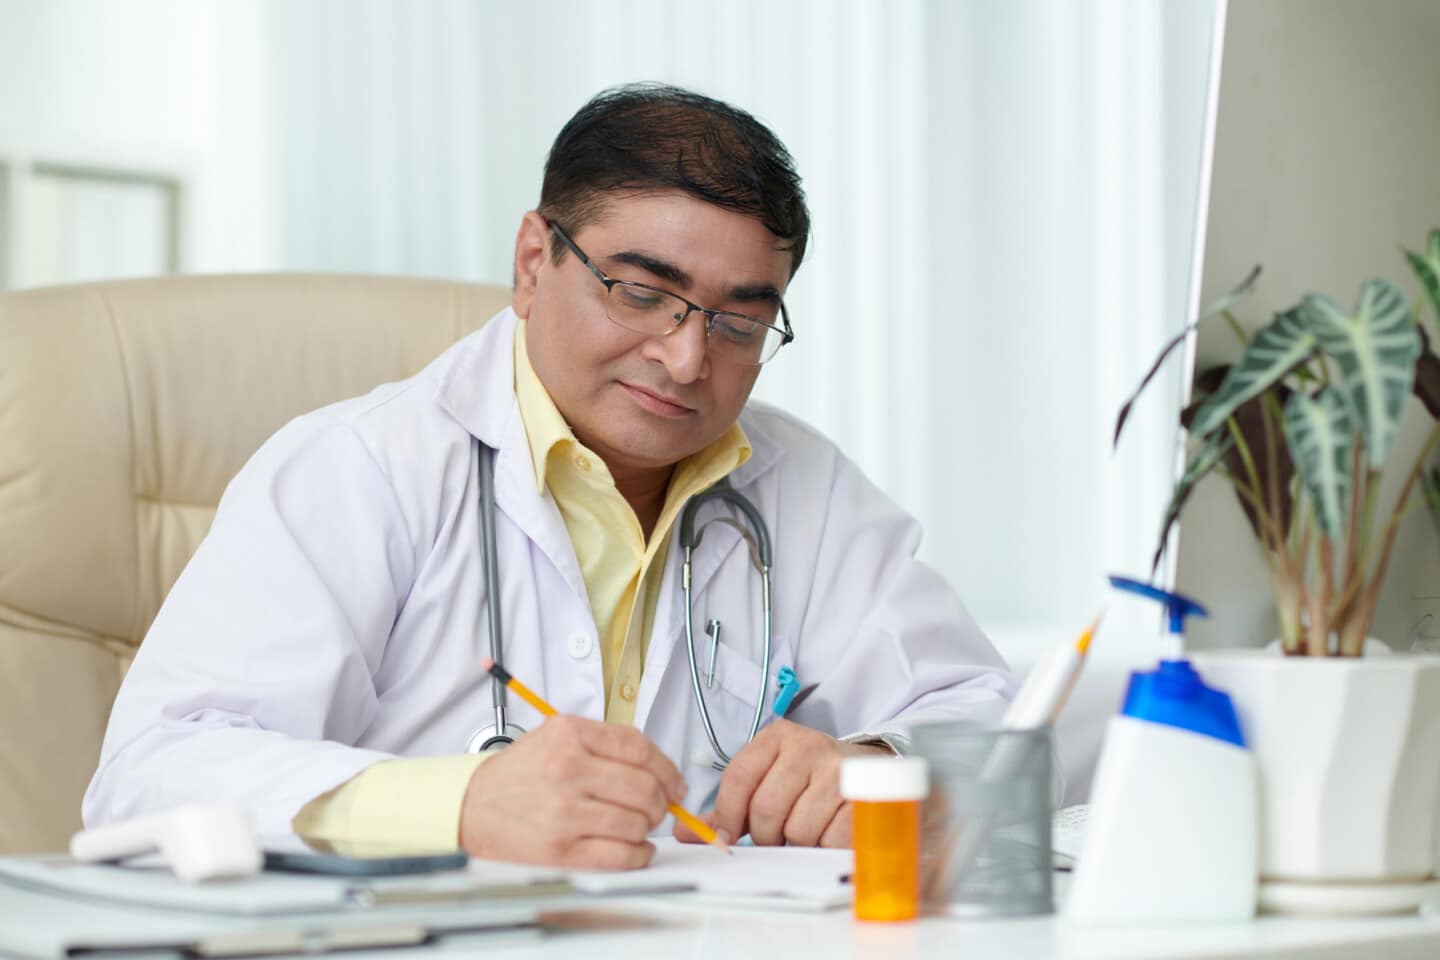 Experienced chief physician signing documents at his desk